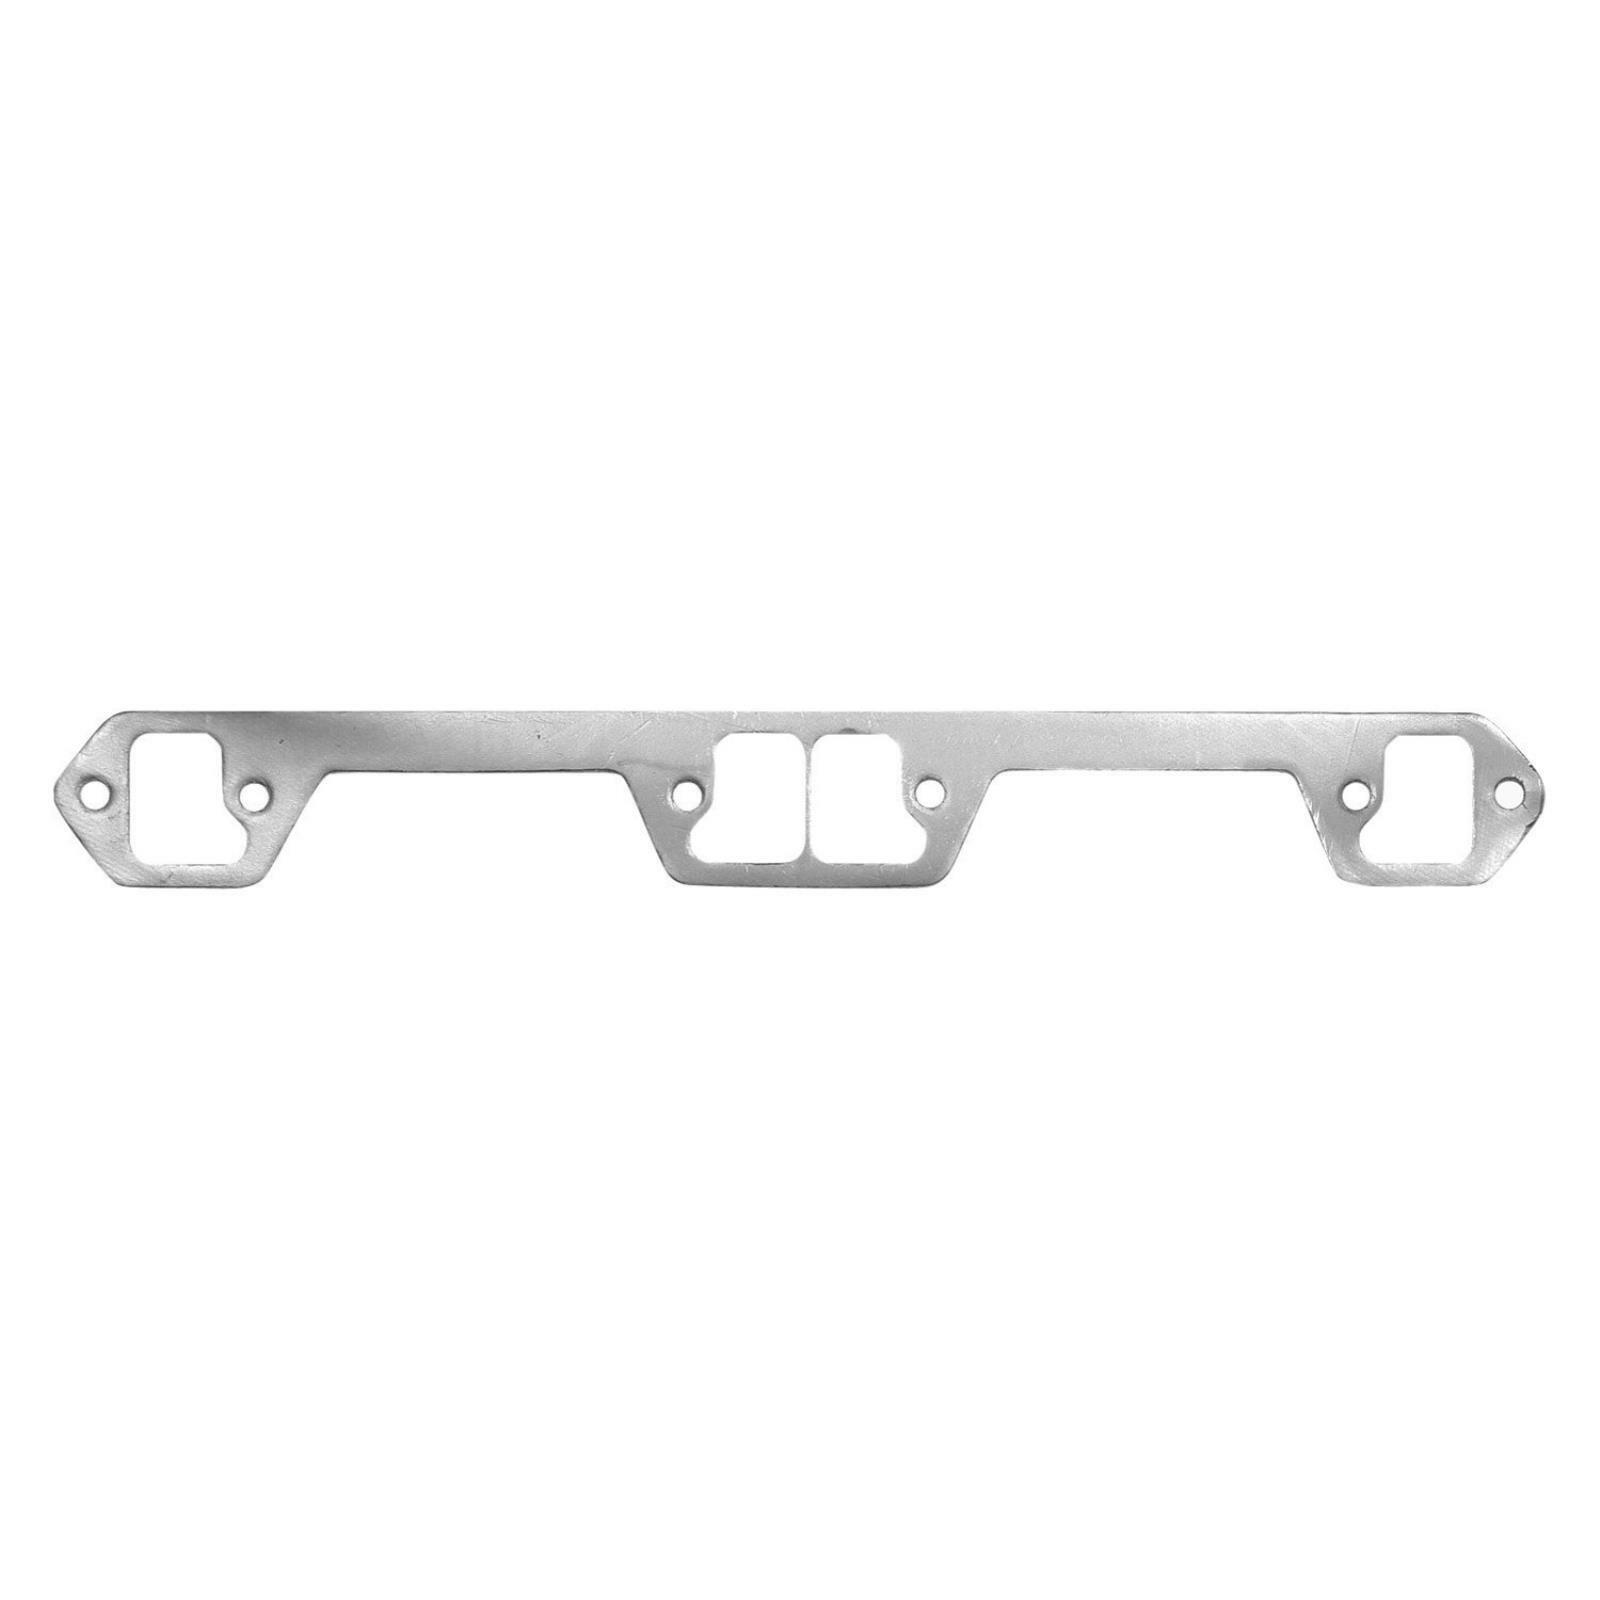 Exhaust Header Gaskets Remflex ED783A Fits 1978-1979 American Motors Pacer